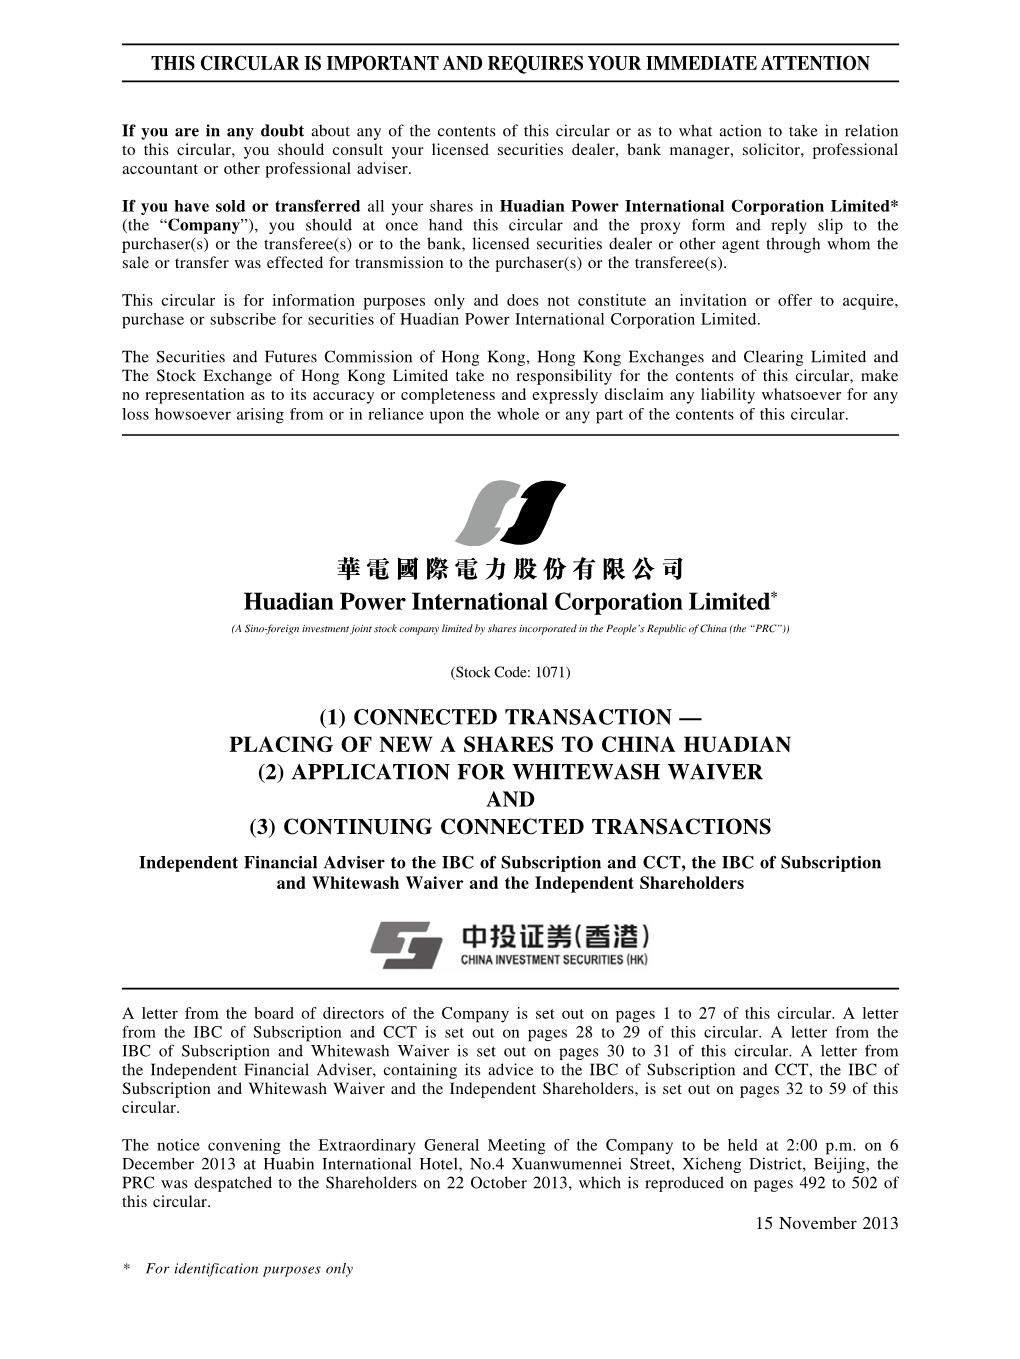 Placing of New a Shares to China Huadian